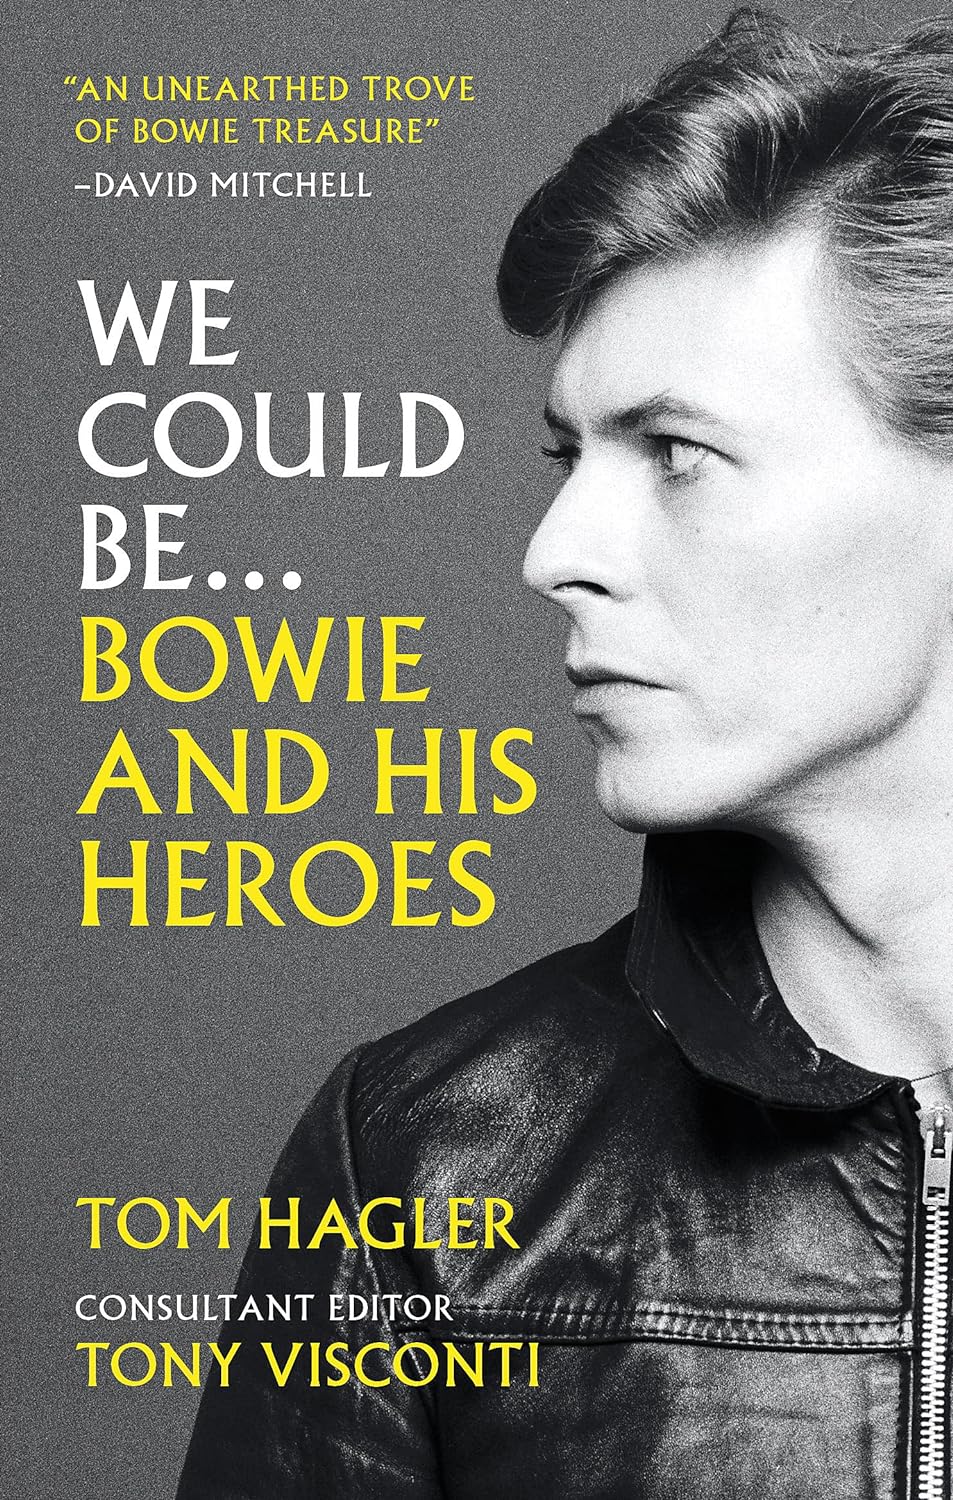 We Could Be: Bowie & His Heroes